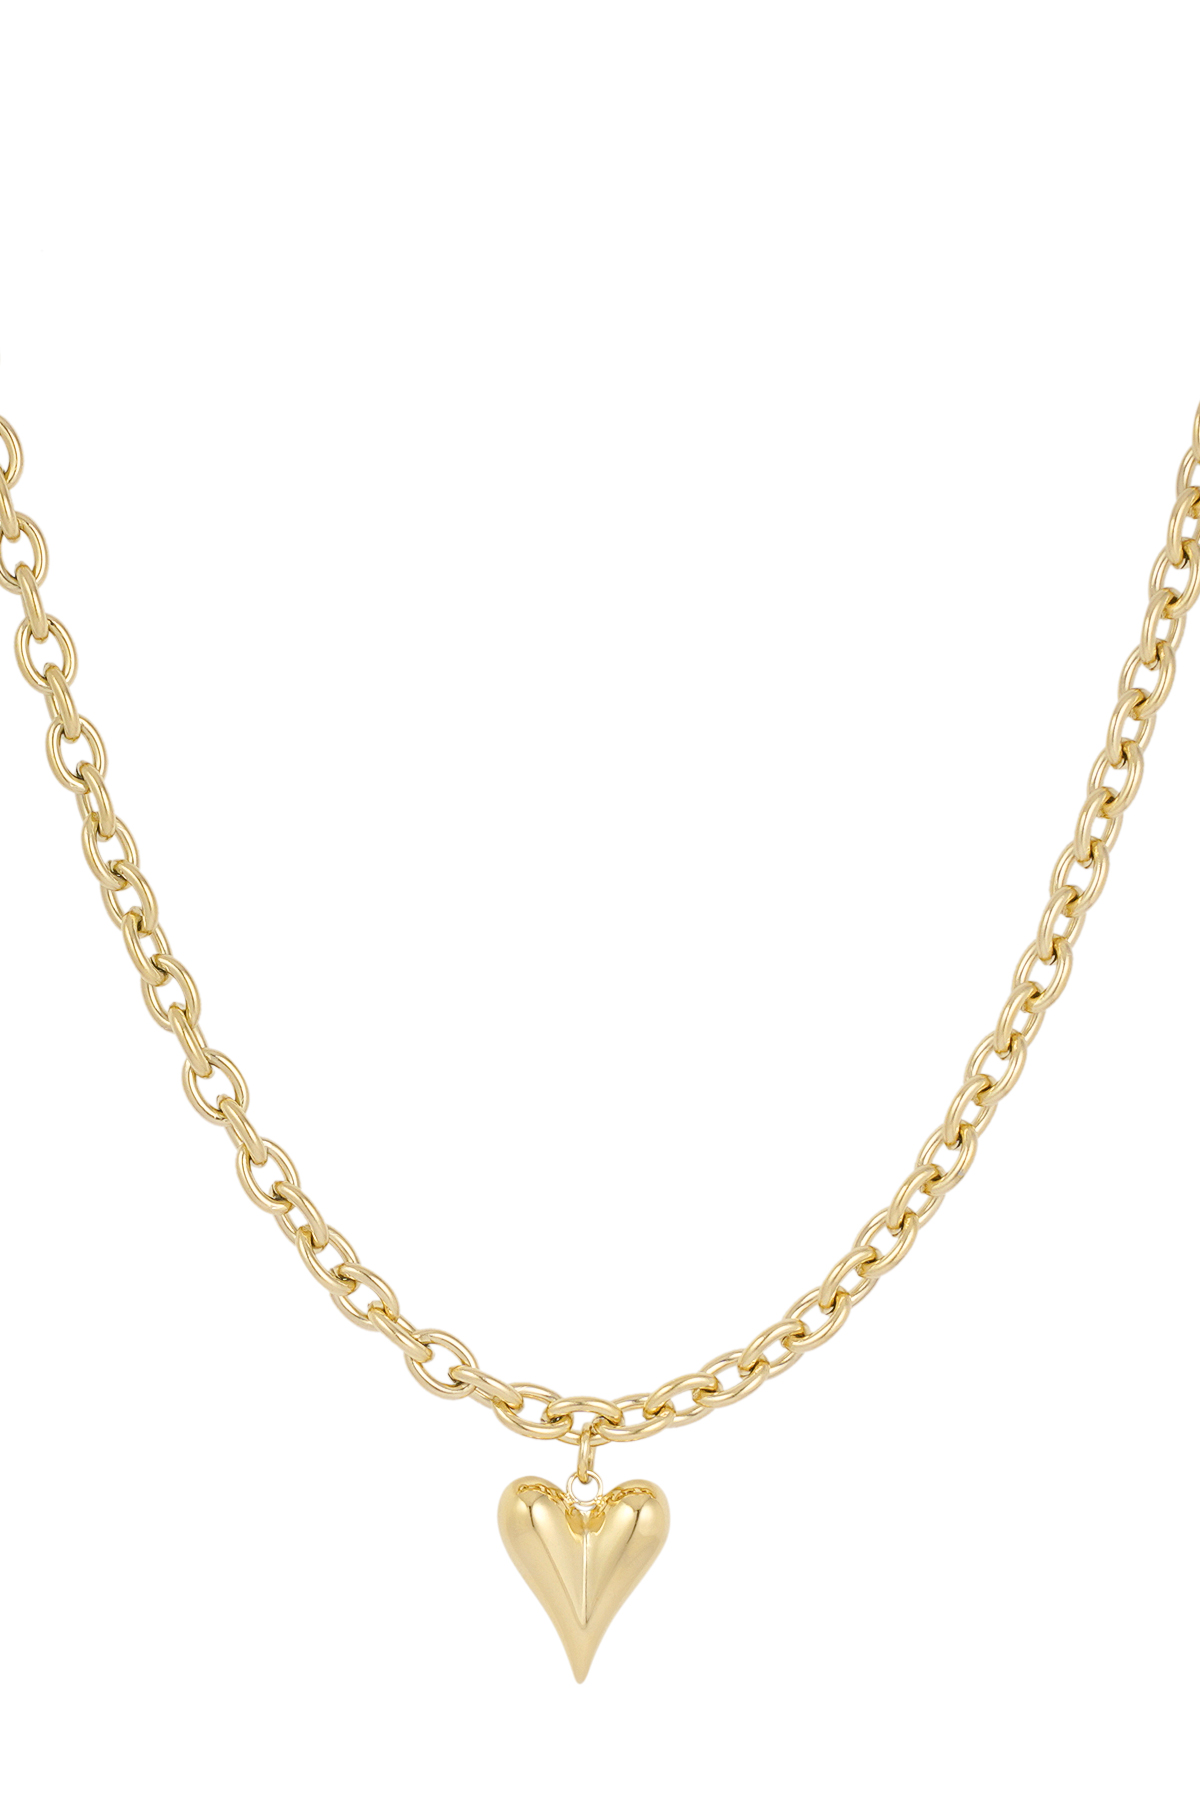 Necklace love rules - gold